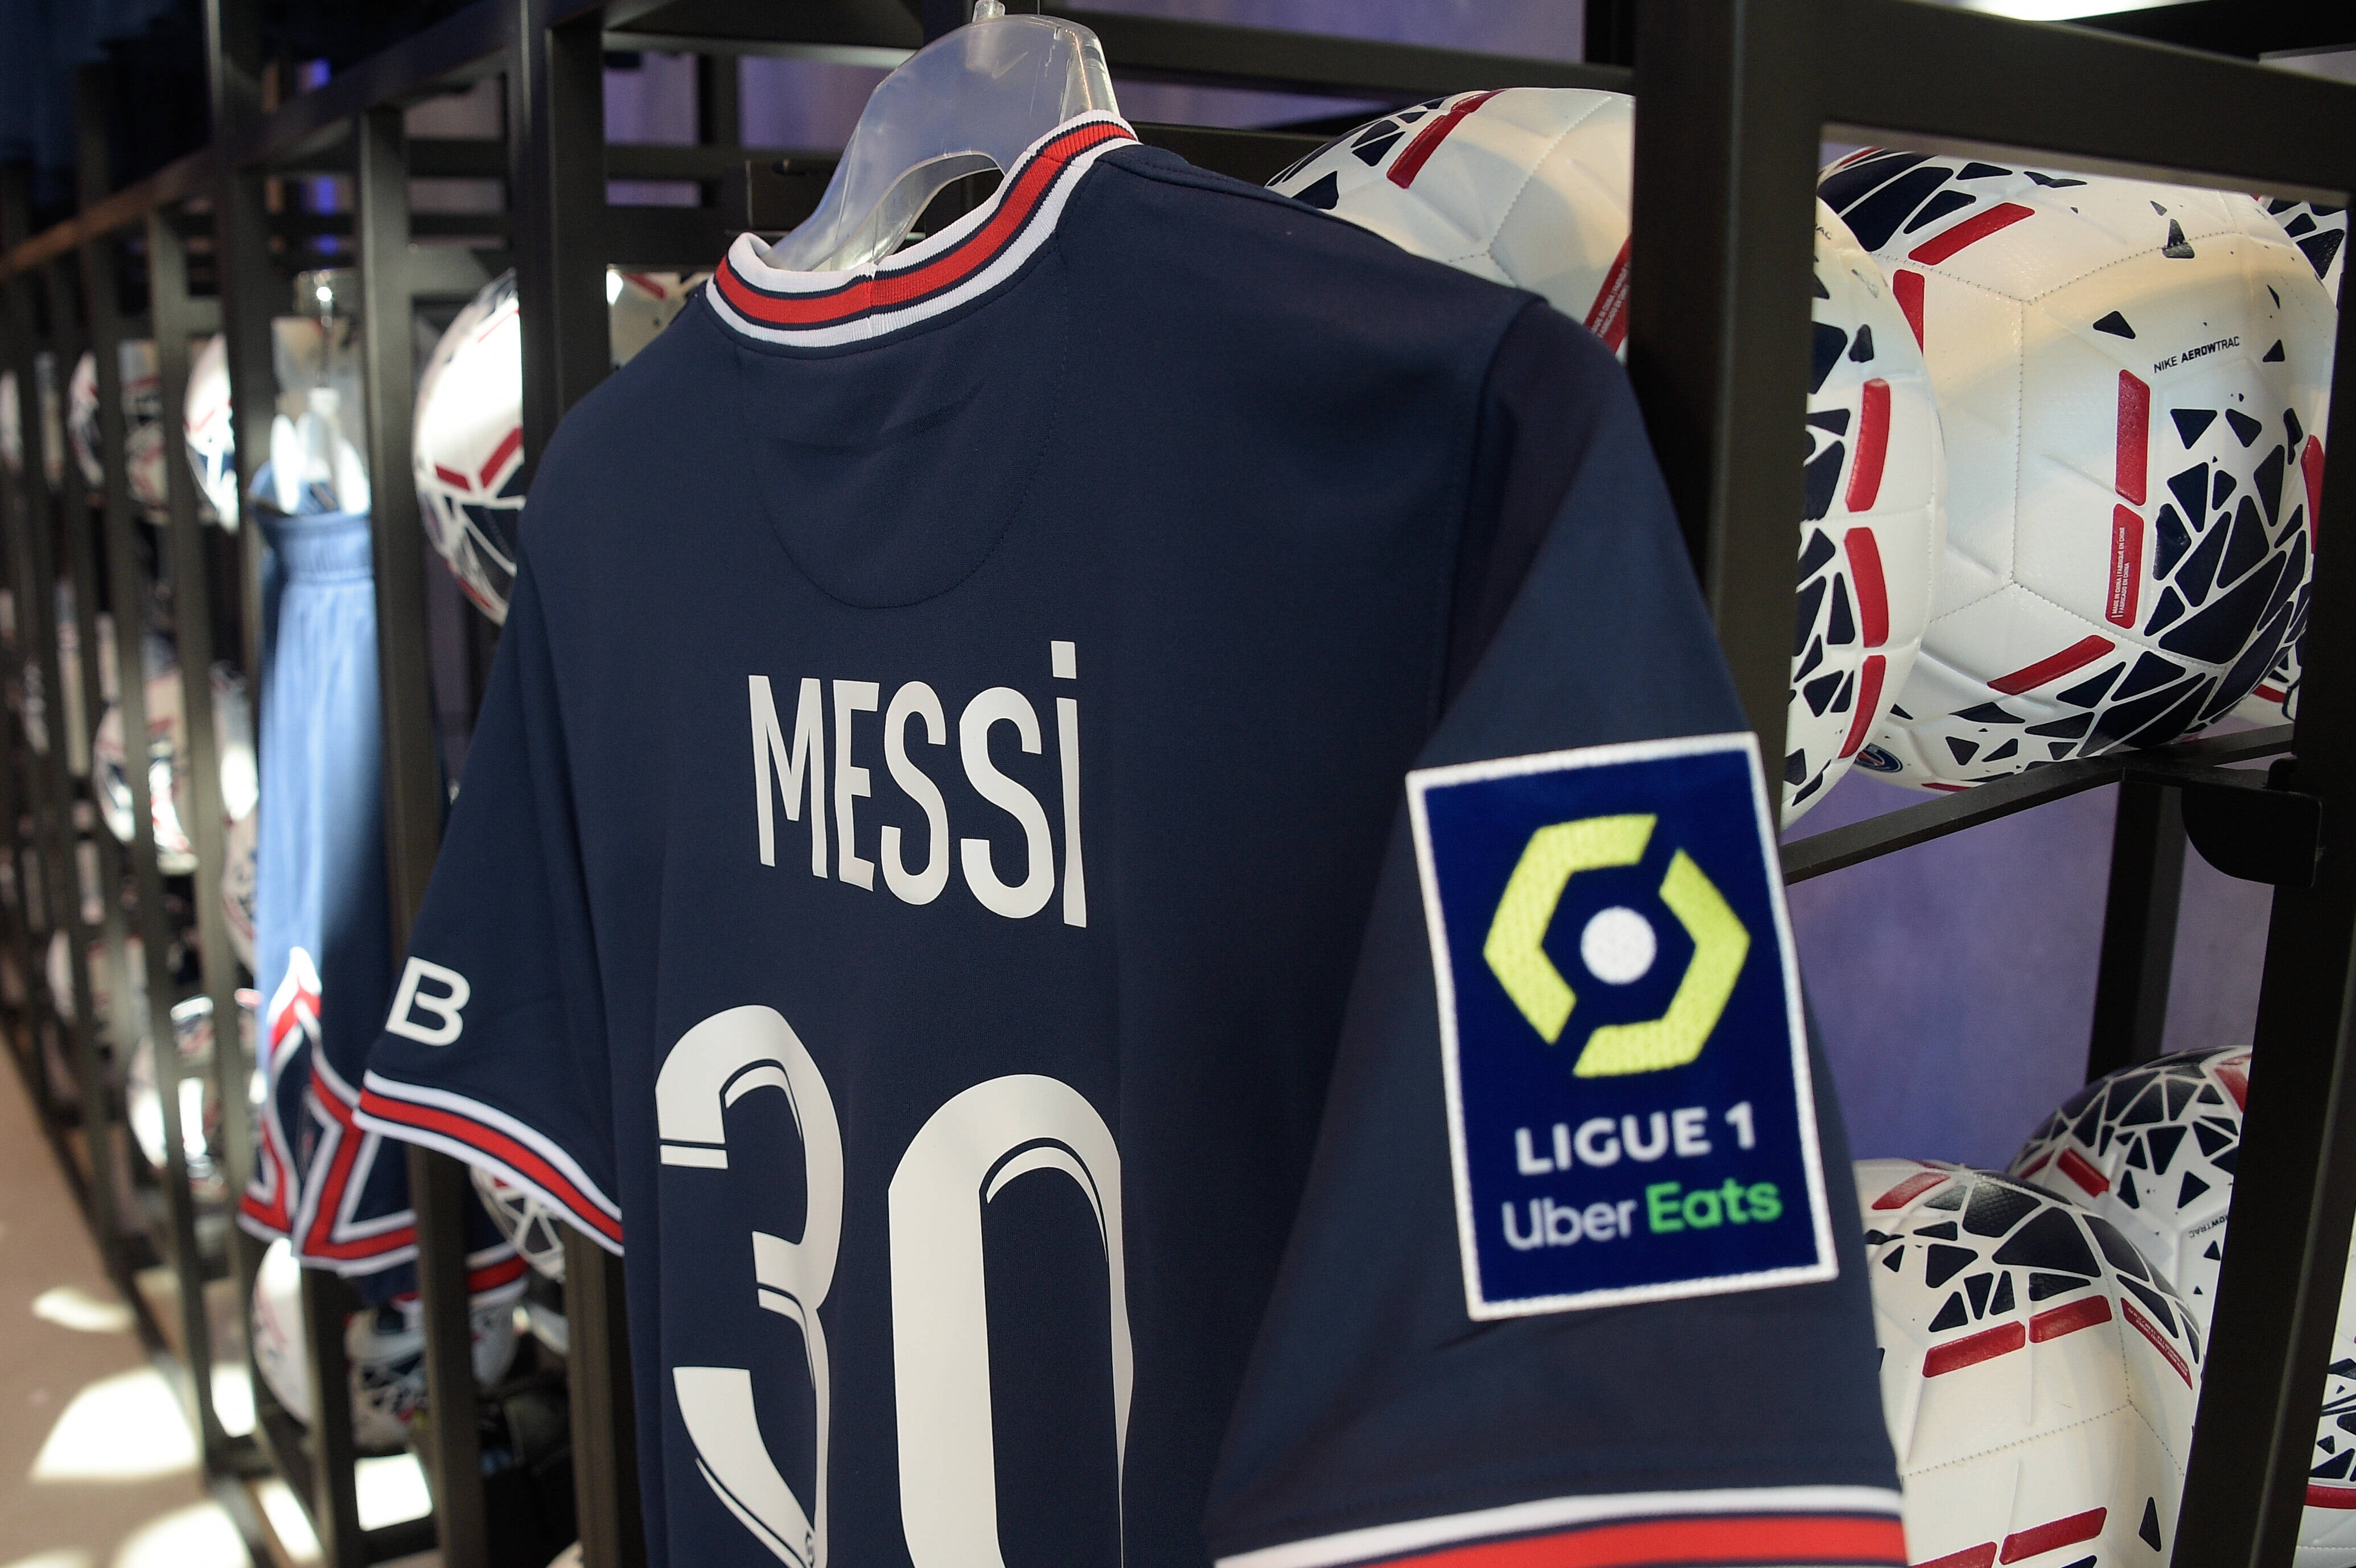 messi youth jersey psg